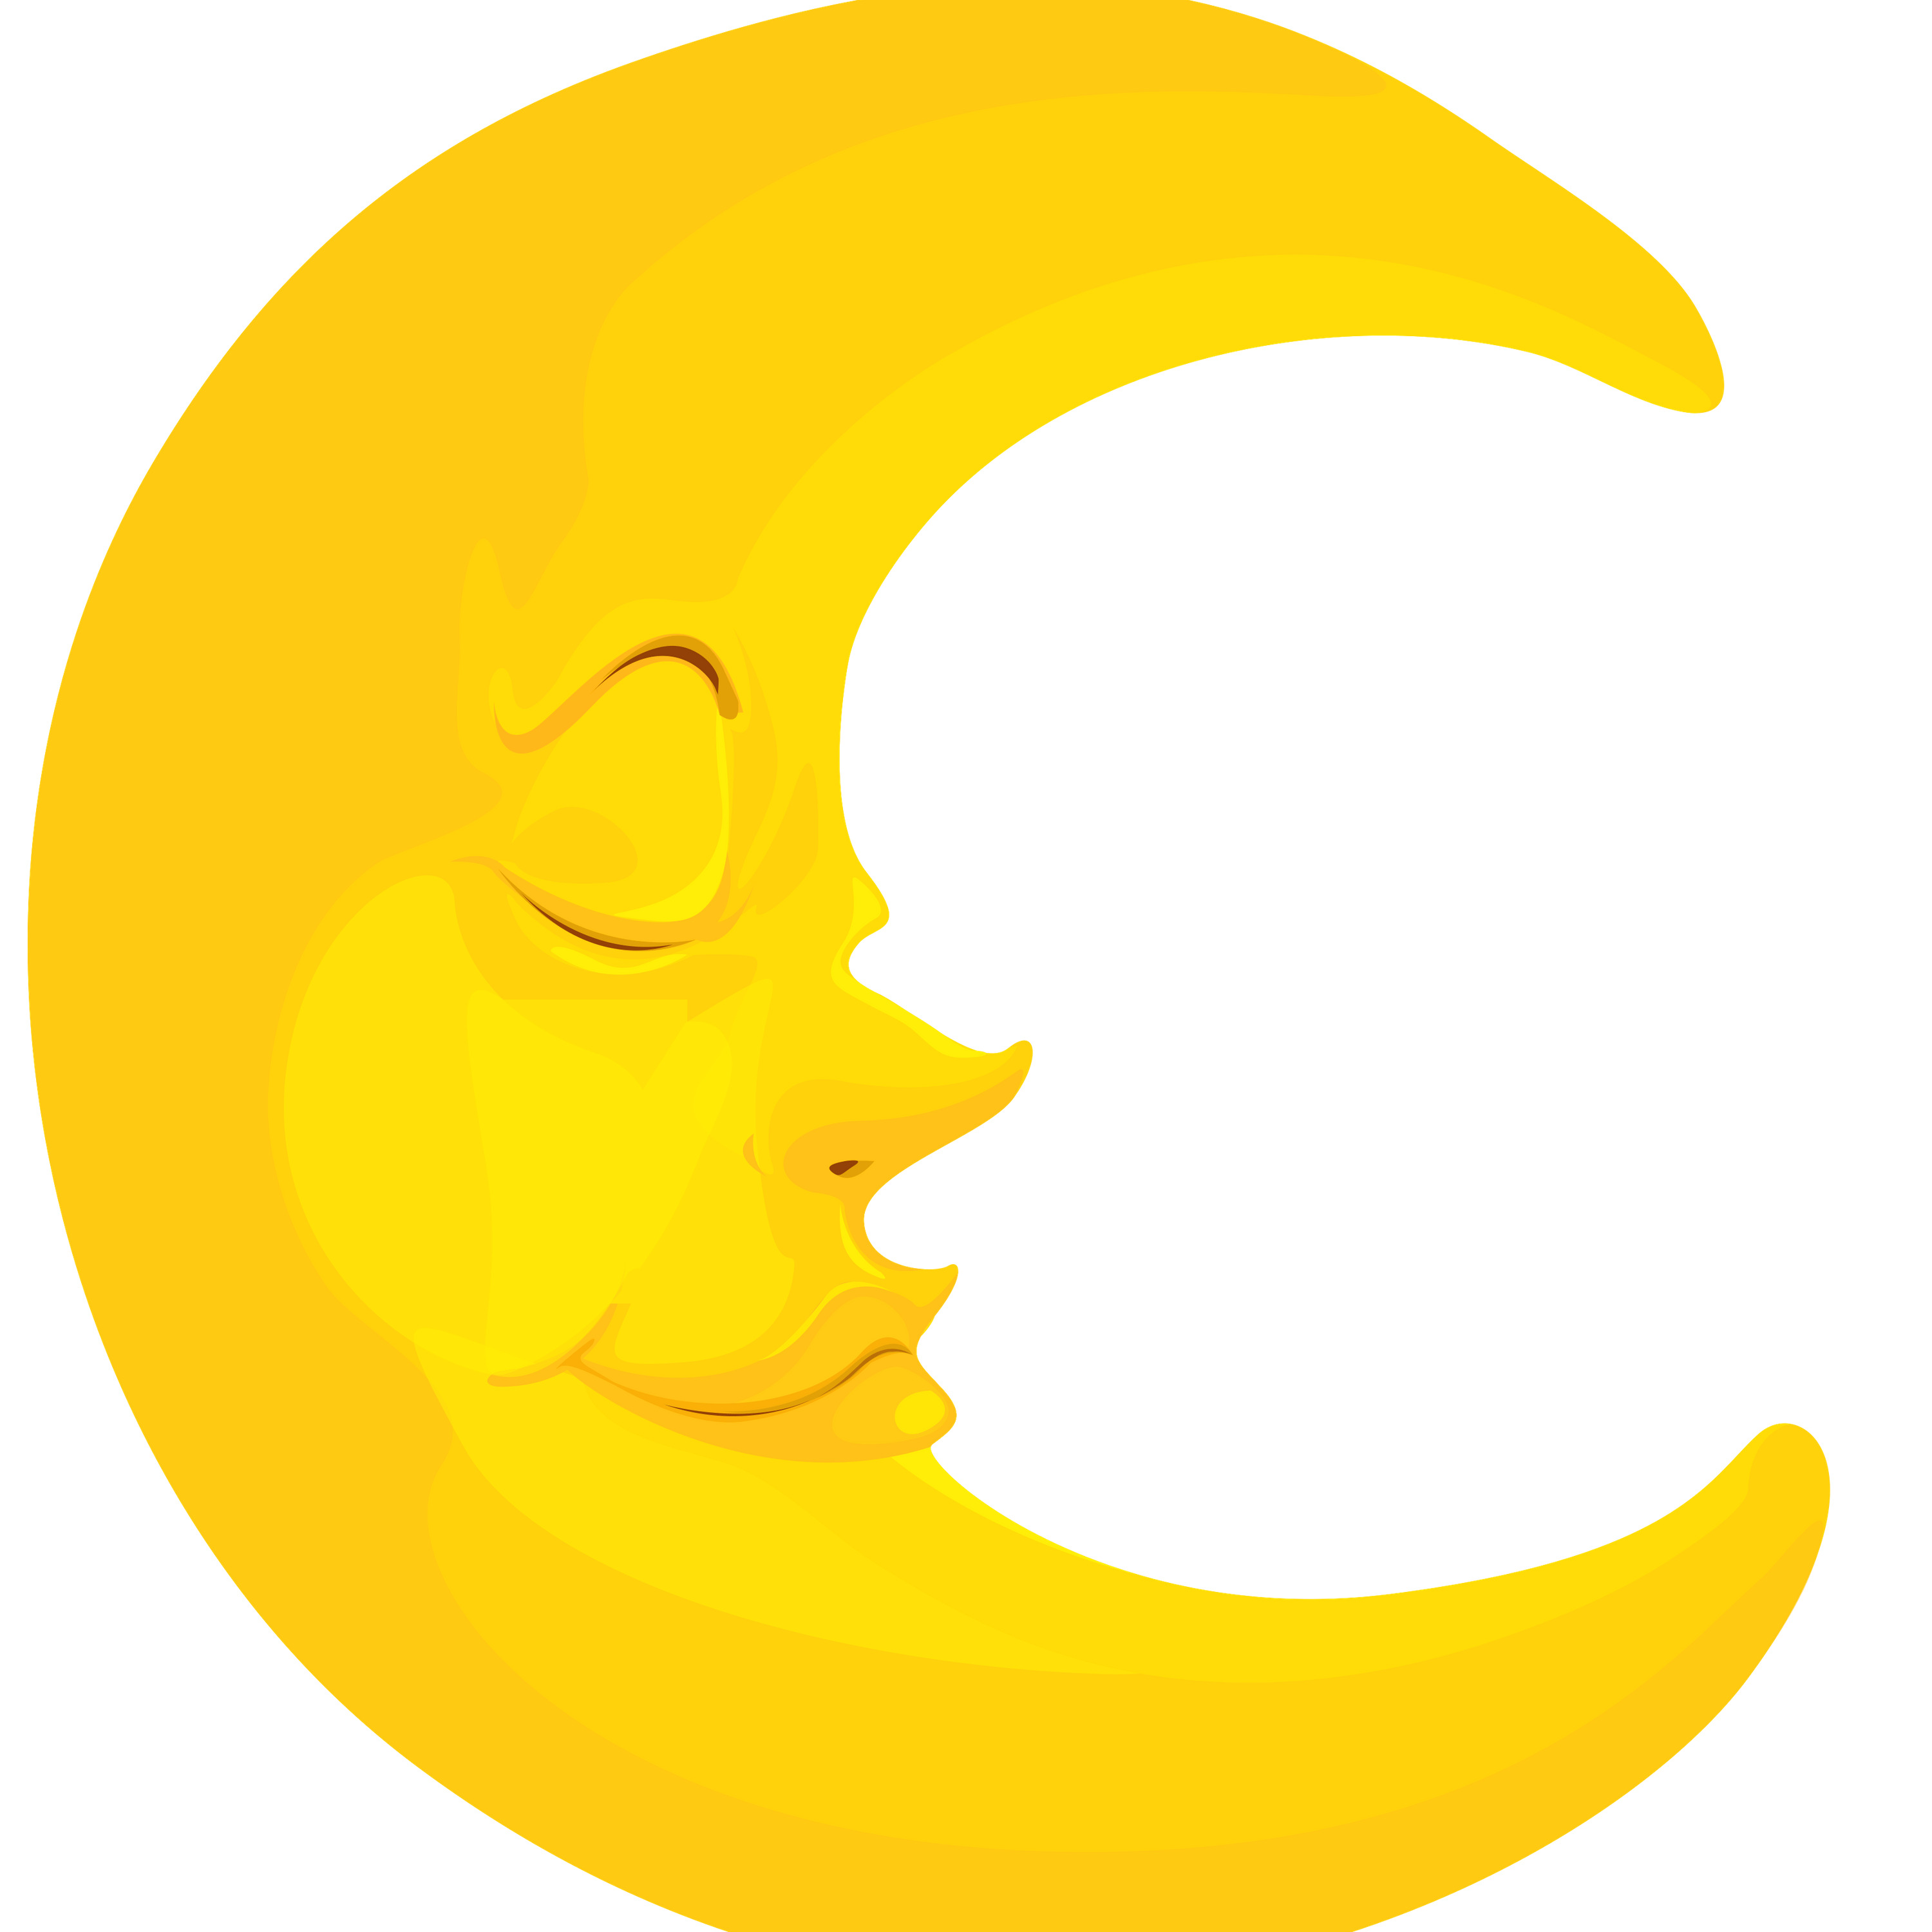 Moon Crescent Clipart icons